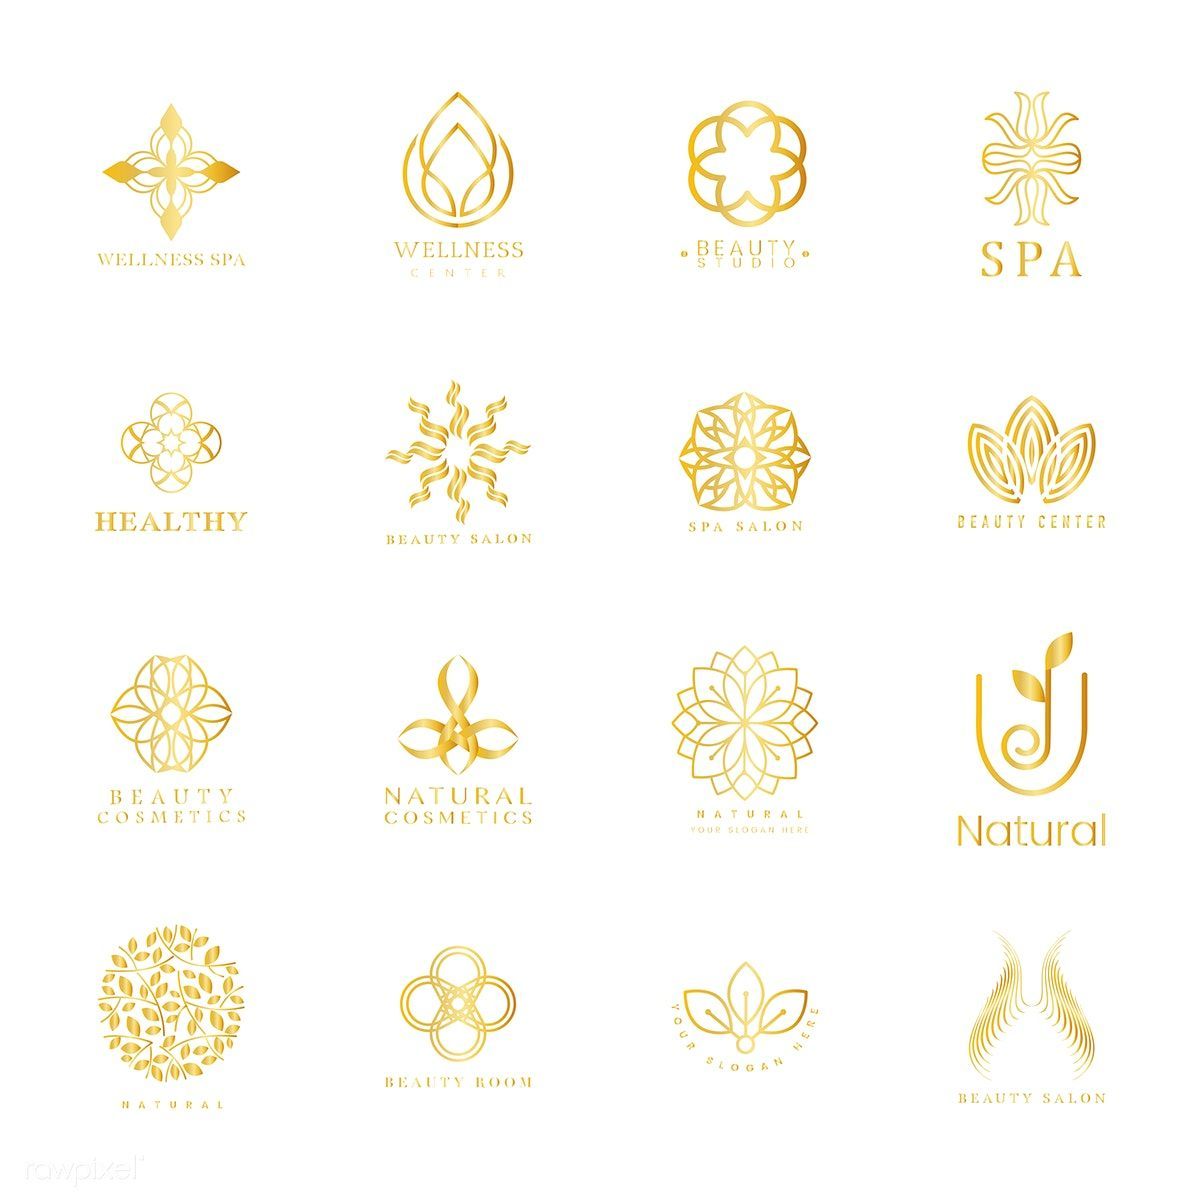 Download premium vector of Set of spa and beauty logo vector 484433 - Download premium vector of Set of spa and beauty logo vector 484433 -   8 beauty Logo vector ideas